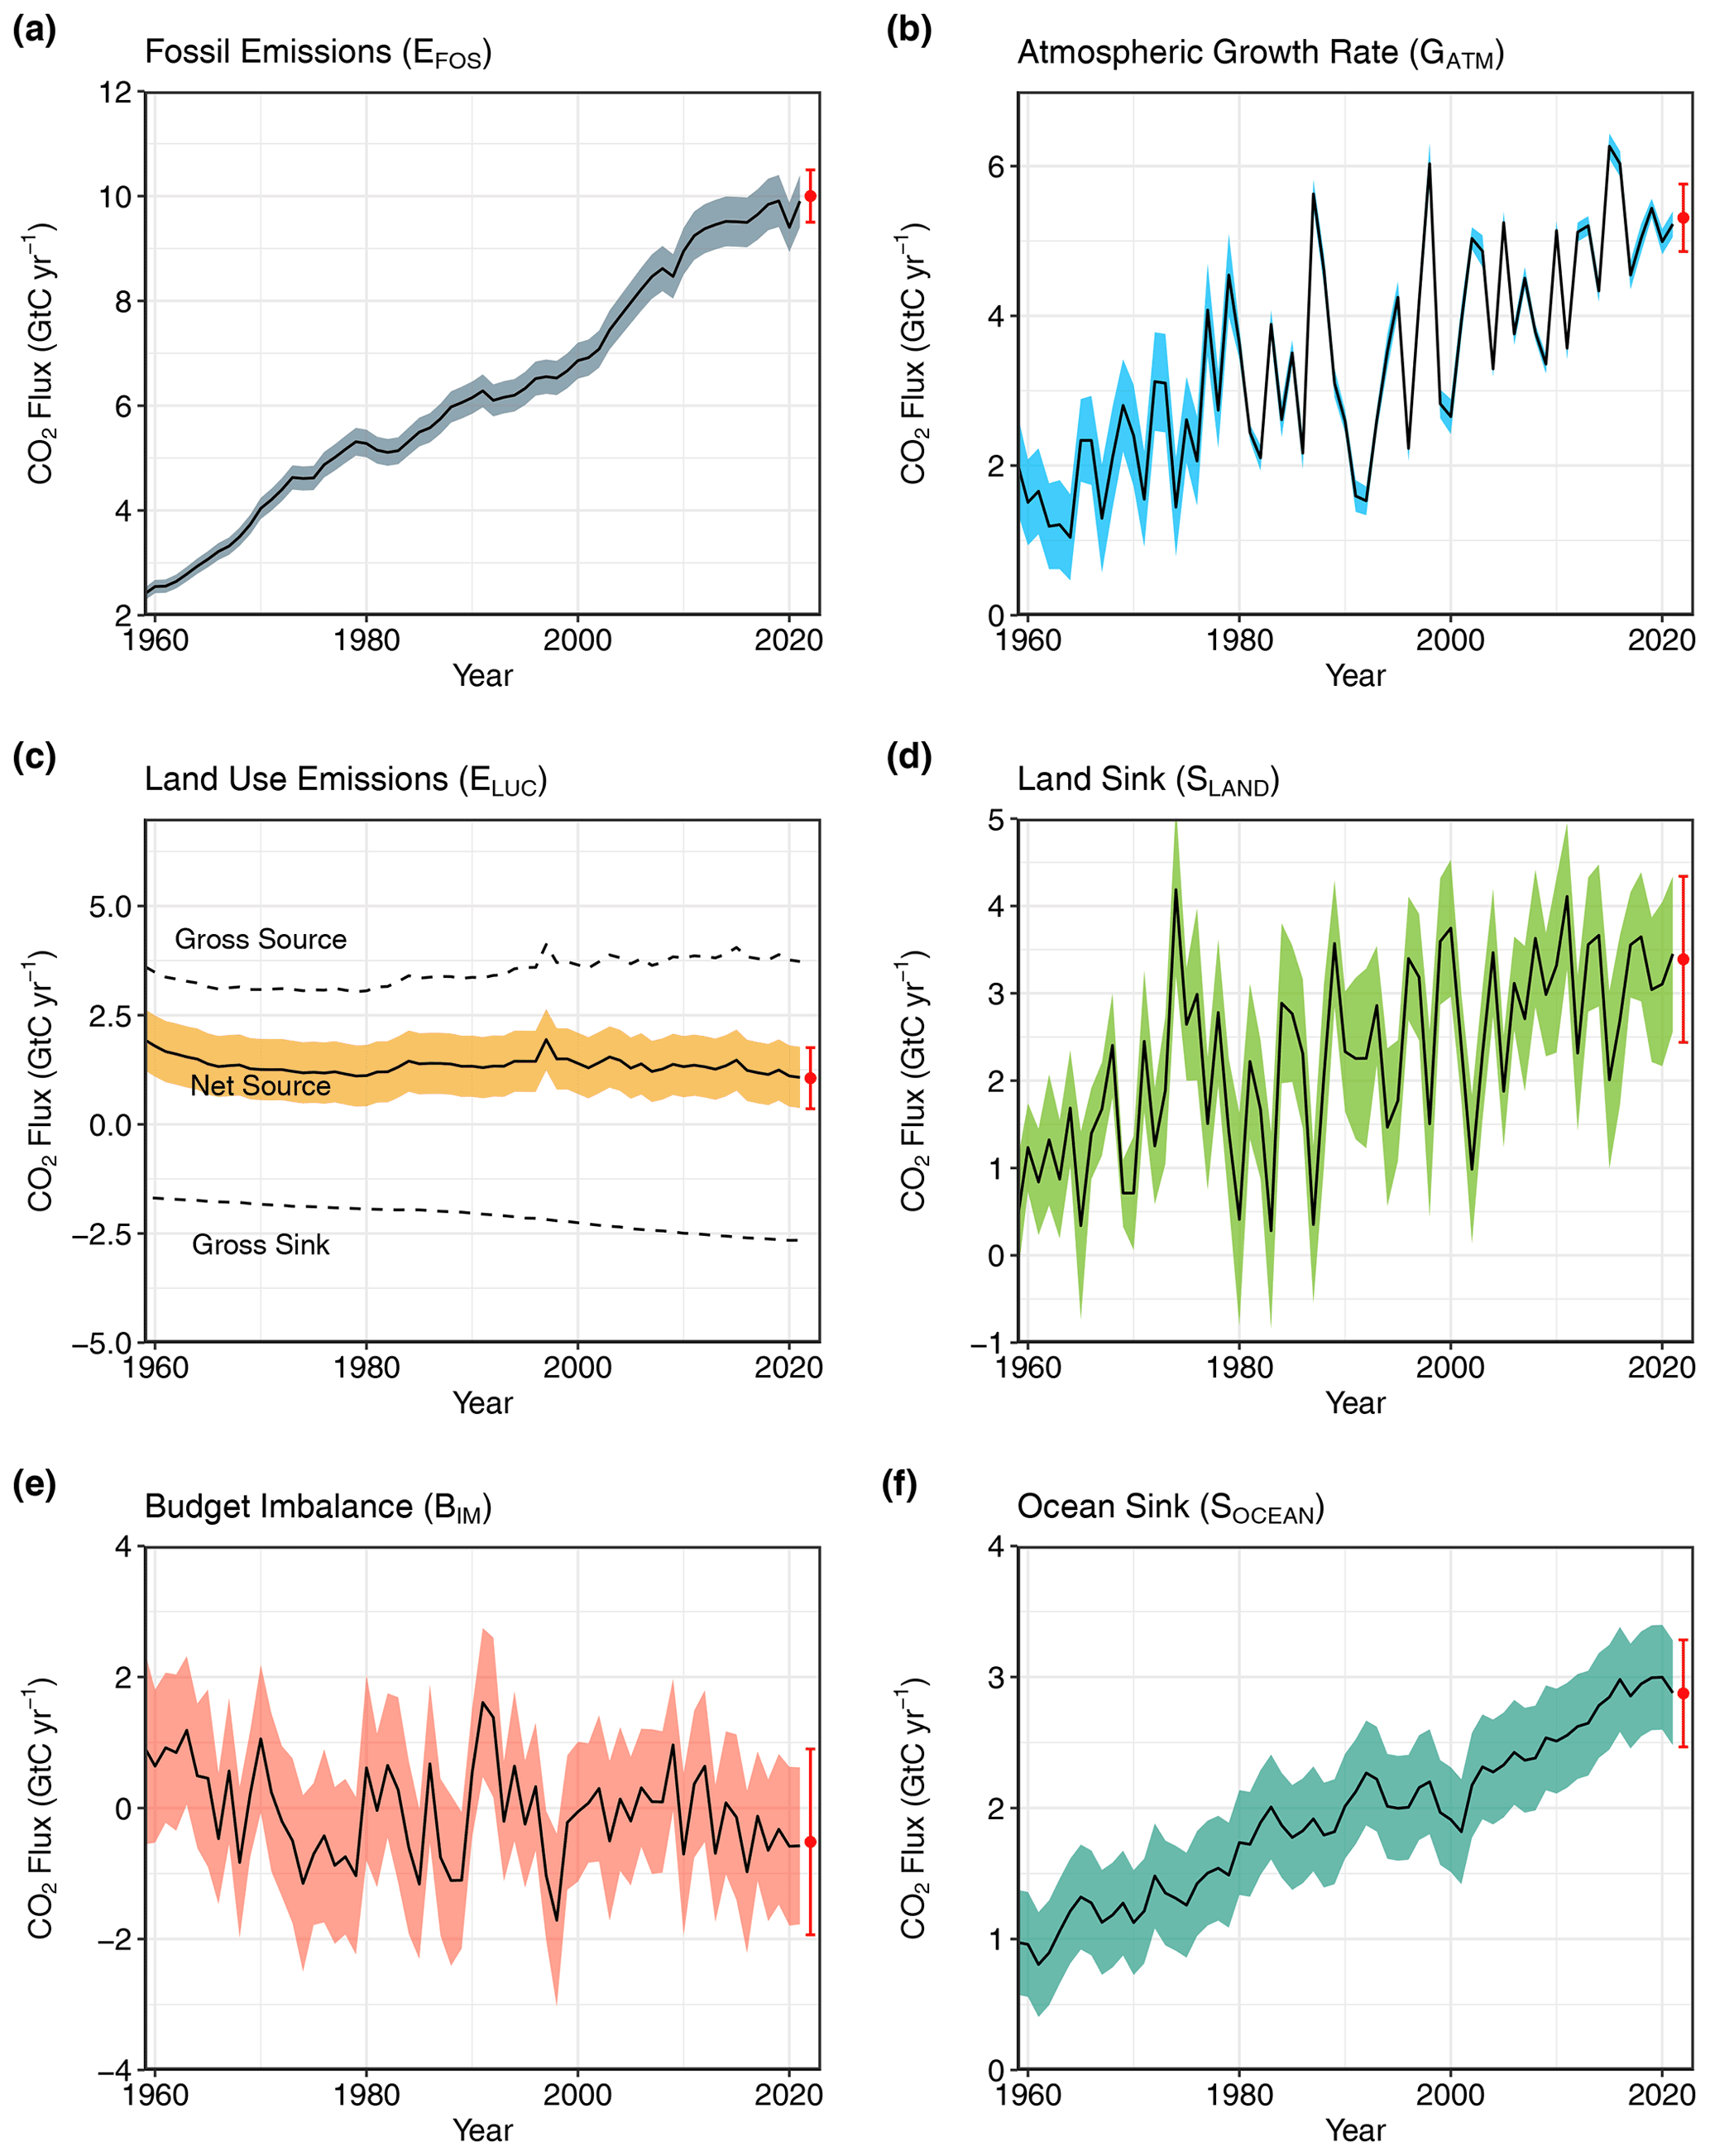 Components of the global carbon budget and their uncertainties, 1960-2021 and projected to 2022. Components are presented individually for (a) fossil CO2 and cement carbonation emissions (EFOS), (b) growth rate in atmospheric CO2 concentration (GATM), (c) emissions from land-use change (ELUC), (d) the land CO2 sink (SLAND), (e) the ocean CO2 sink (SOCEAN), and (f) the budget imbalance that is not accounted for by the other terms. Positive values of SLAND and SOCEAN represent a flux from the atmosphere to land or the ocean. All data are in GtC yr−1 with the uncertainty bounds representing ±1 standard deviation in shaded colour. Data sources are as in Fig. 3. The red dots indicate our projections for the year 2022, and the red error bars the uncertainty in the projections. Graphic: Friedlingstein, et al., 2022 / Earth System Science Data